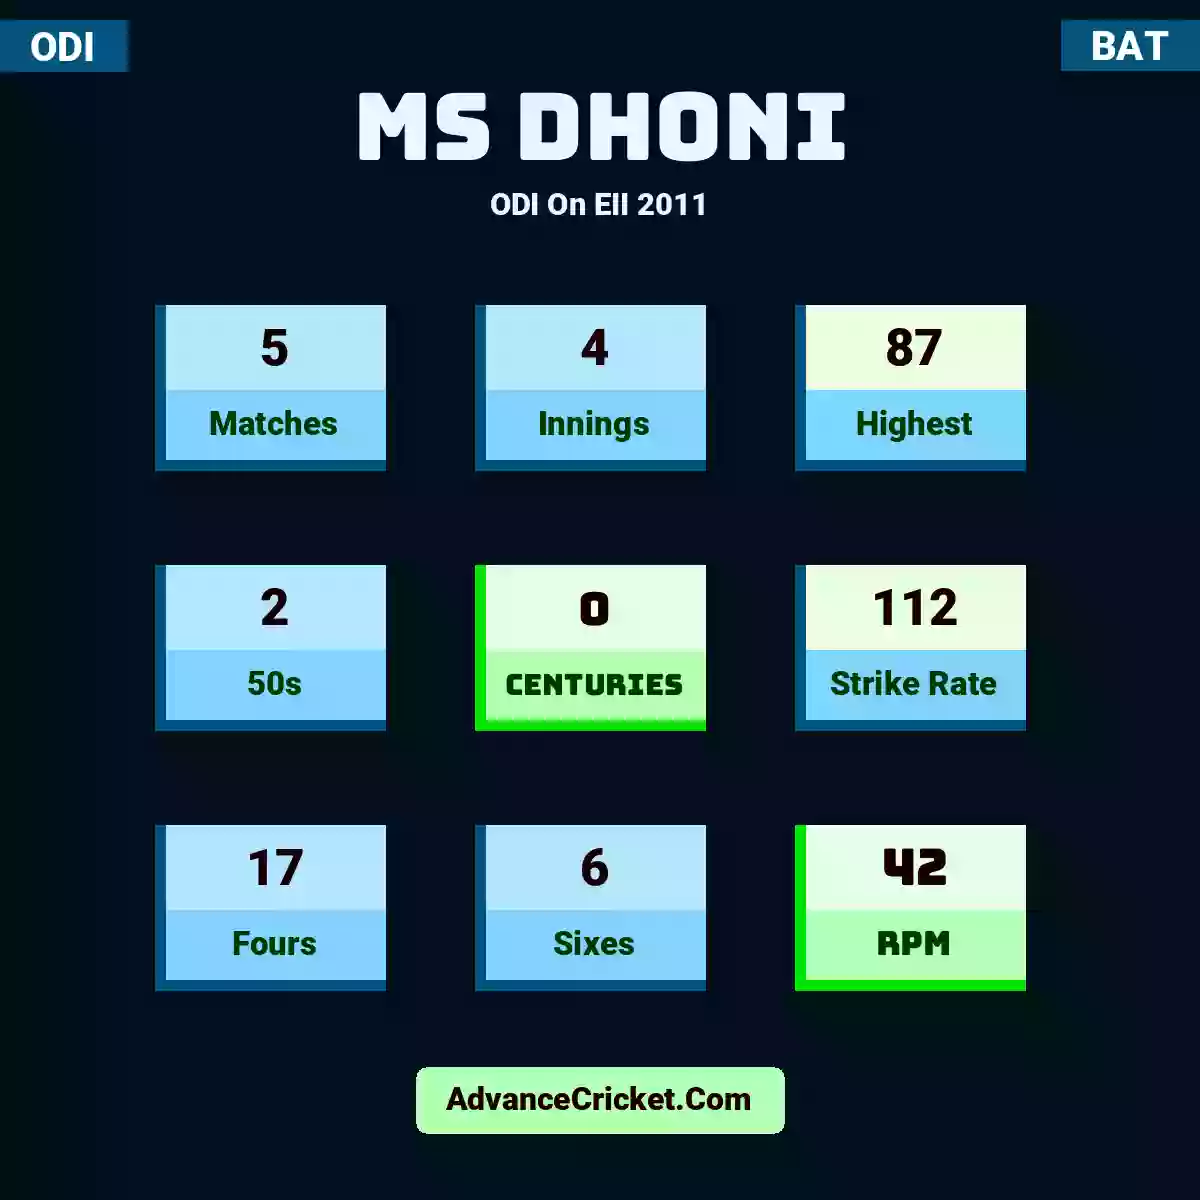 MS Dhoni ODI  On EII 2011, MS Dhoni played 5 matches, scored 87 runs as highest, 2 half-centuries, and 0 centuries, with a strike rate of 112. M.Dhoni hit 17 fours and 6 sixes, with an RPM of 42.